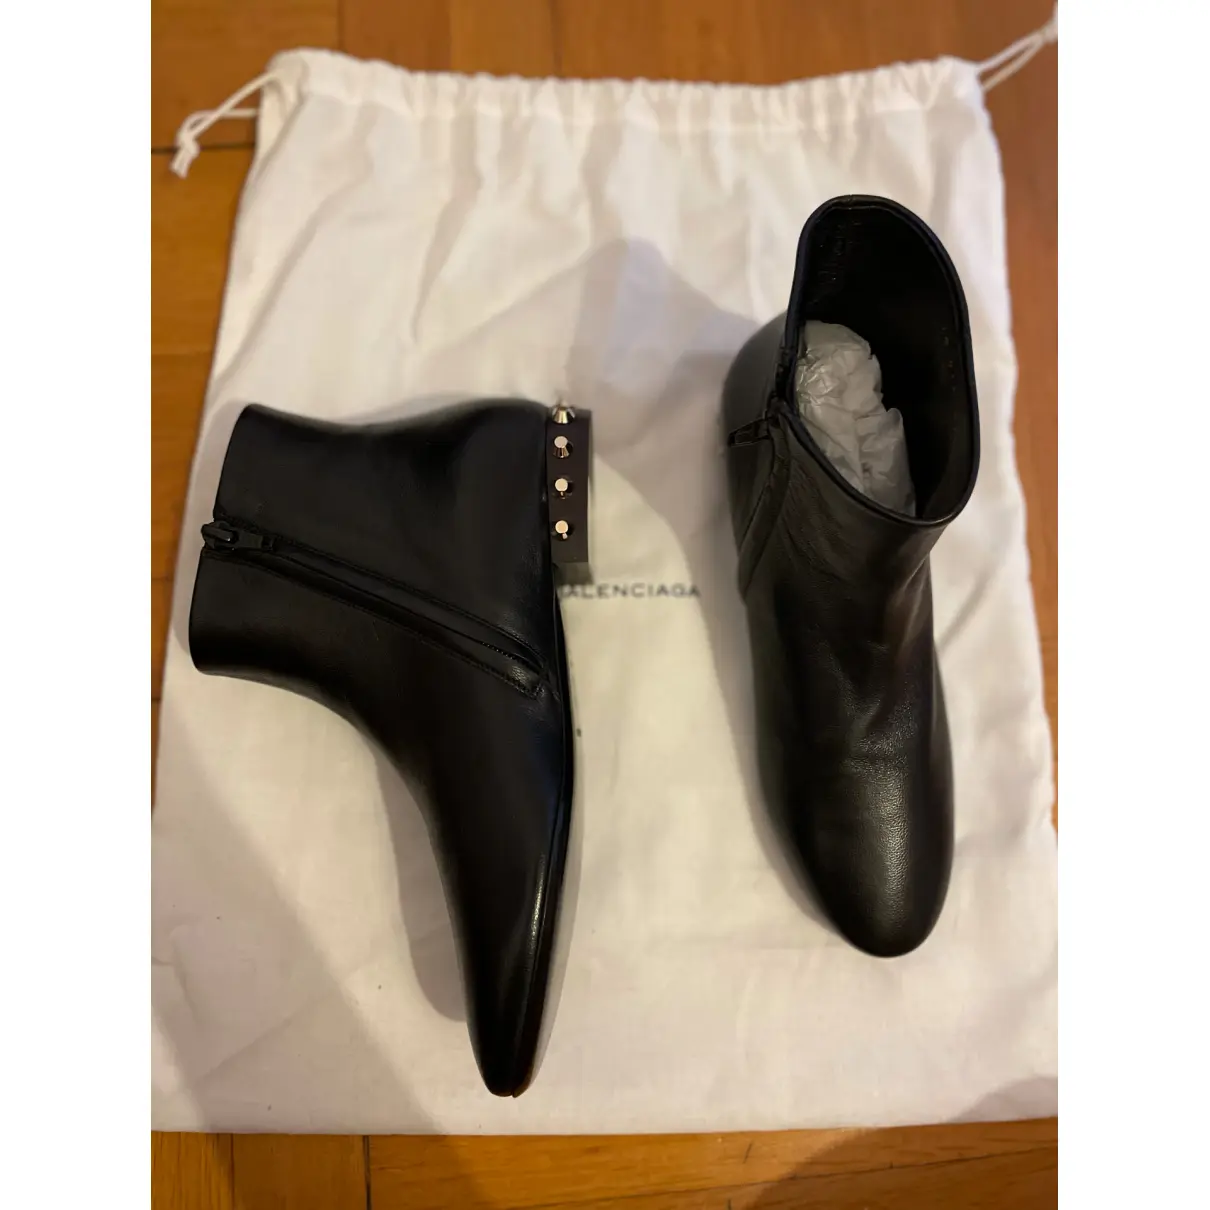 Buy Balenciaga Round leather ankle boots online